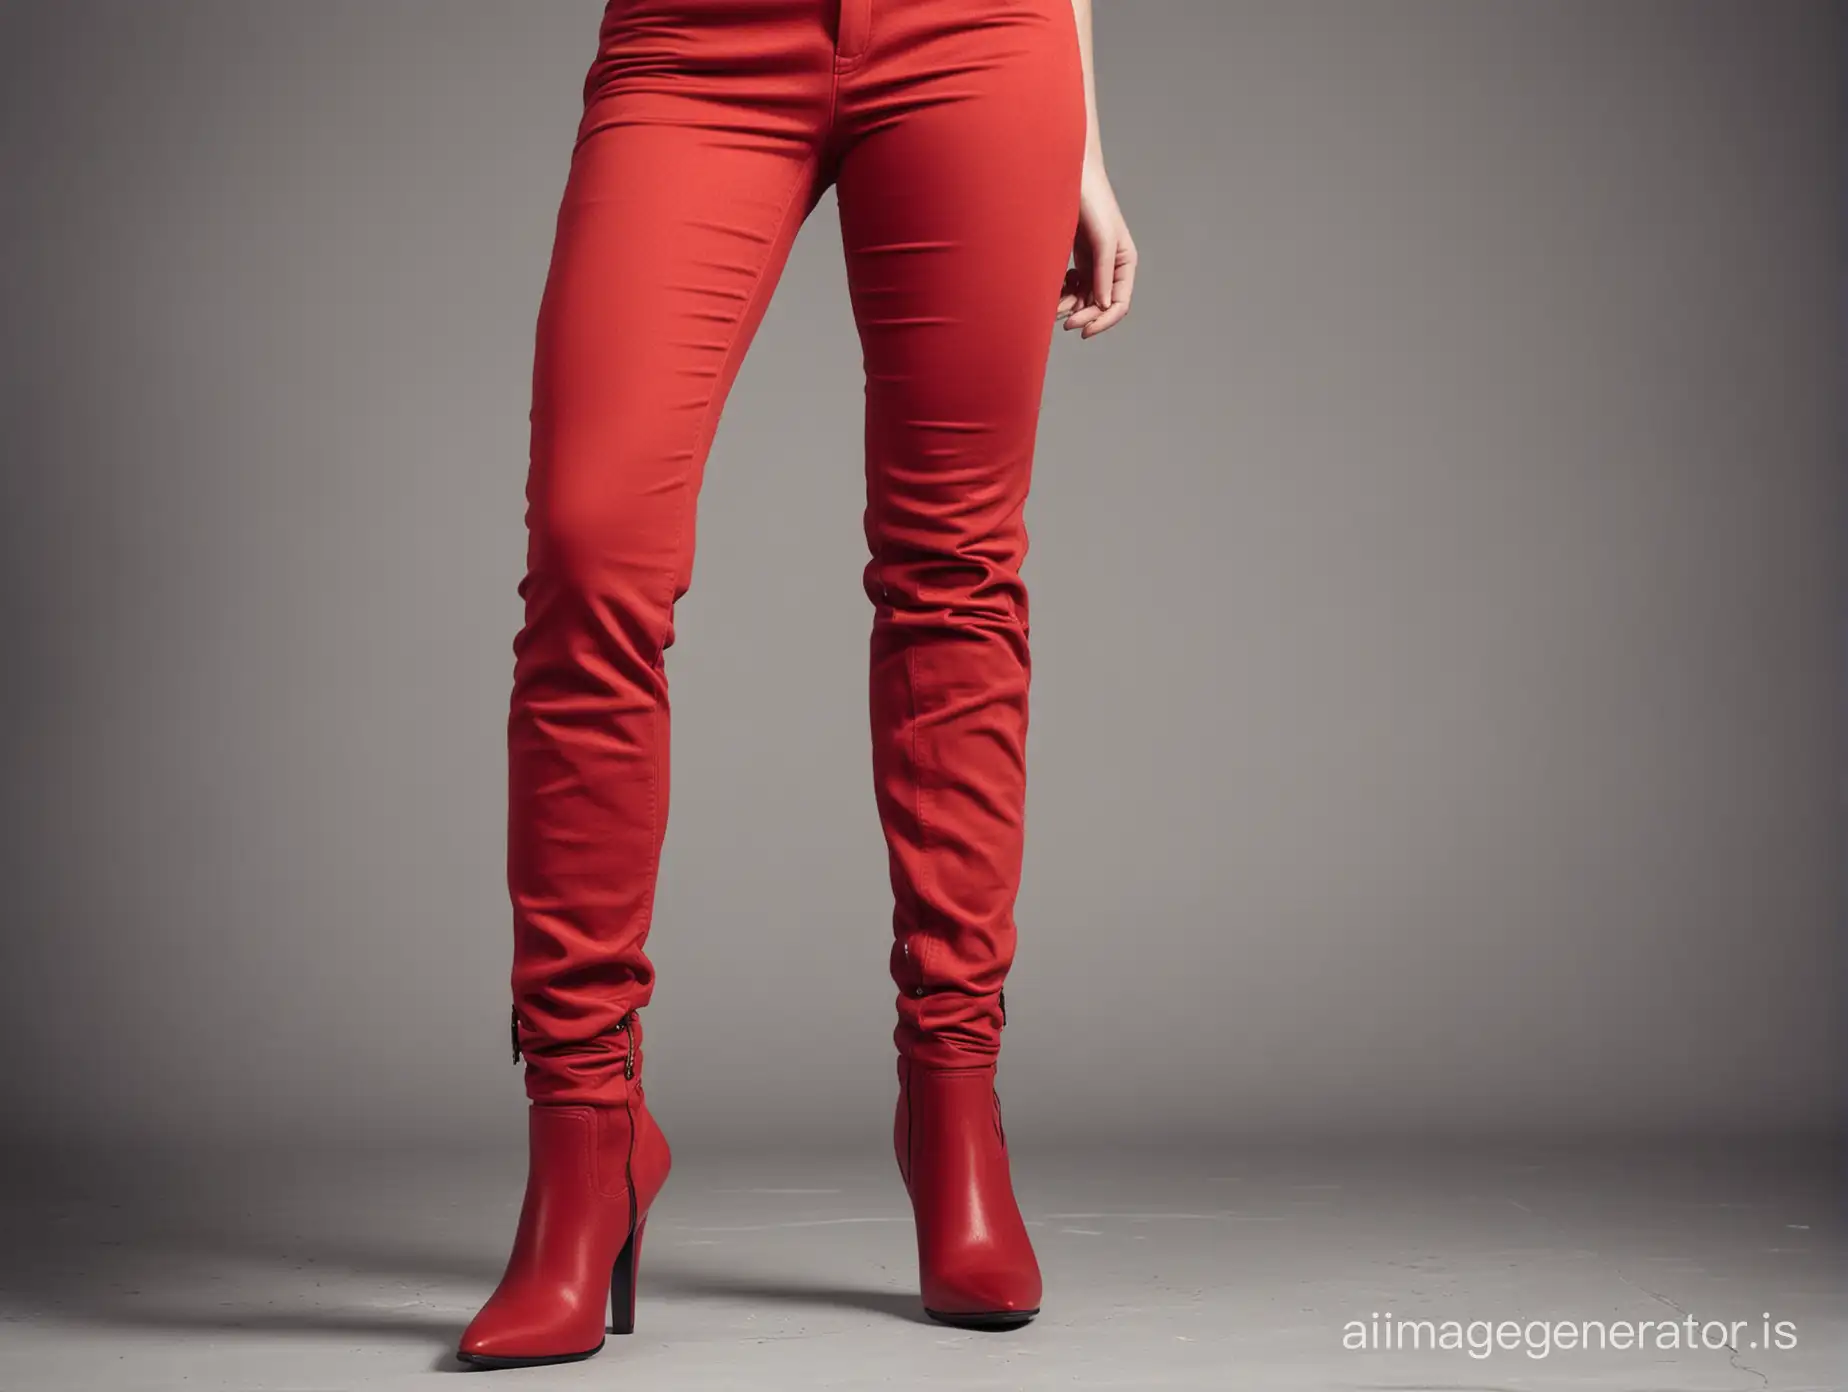 Fashionable-Woman-in-Red-Textile-Pants-and-High-Heel-Boots